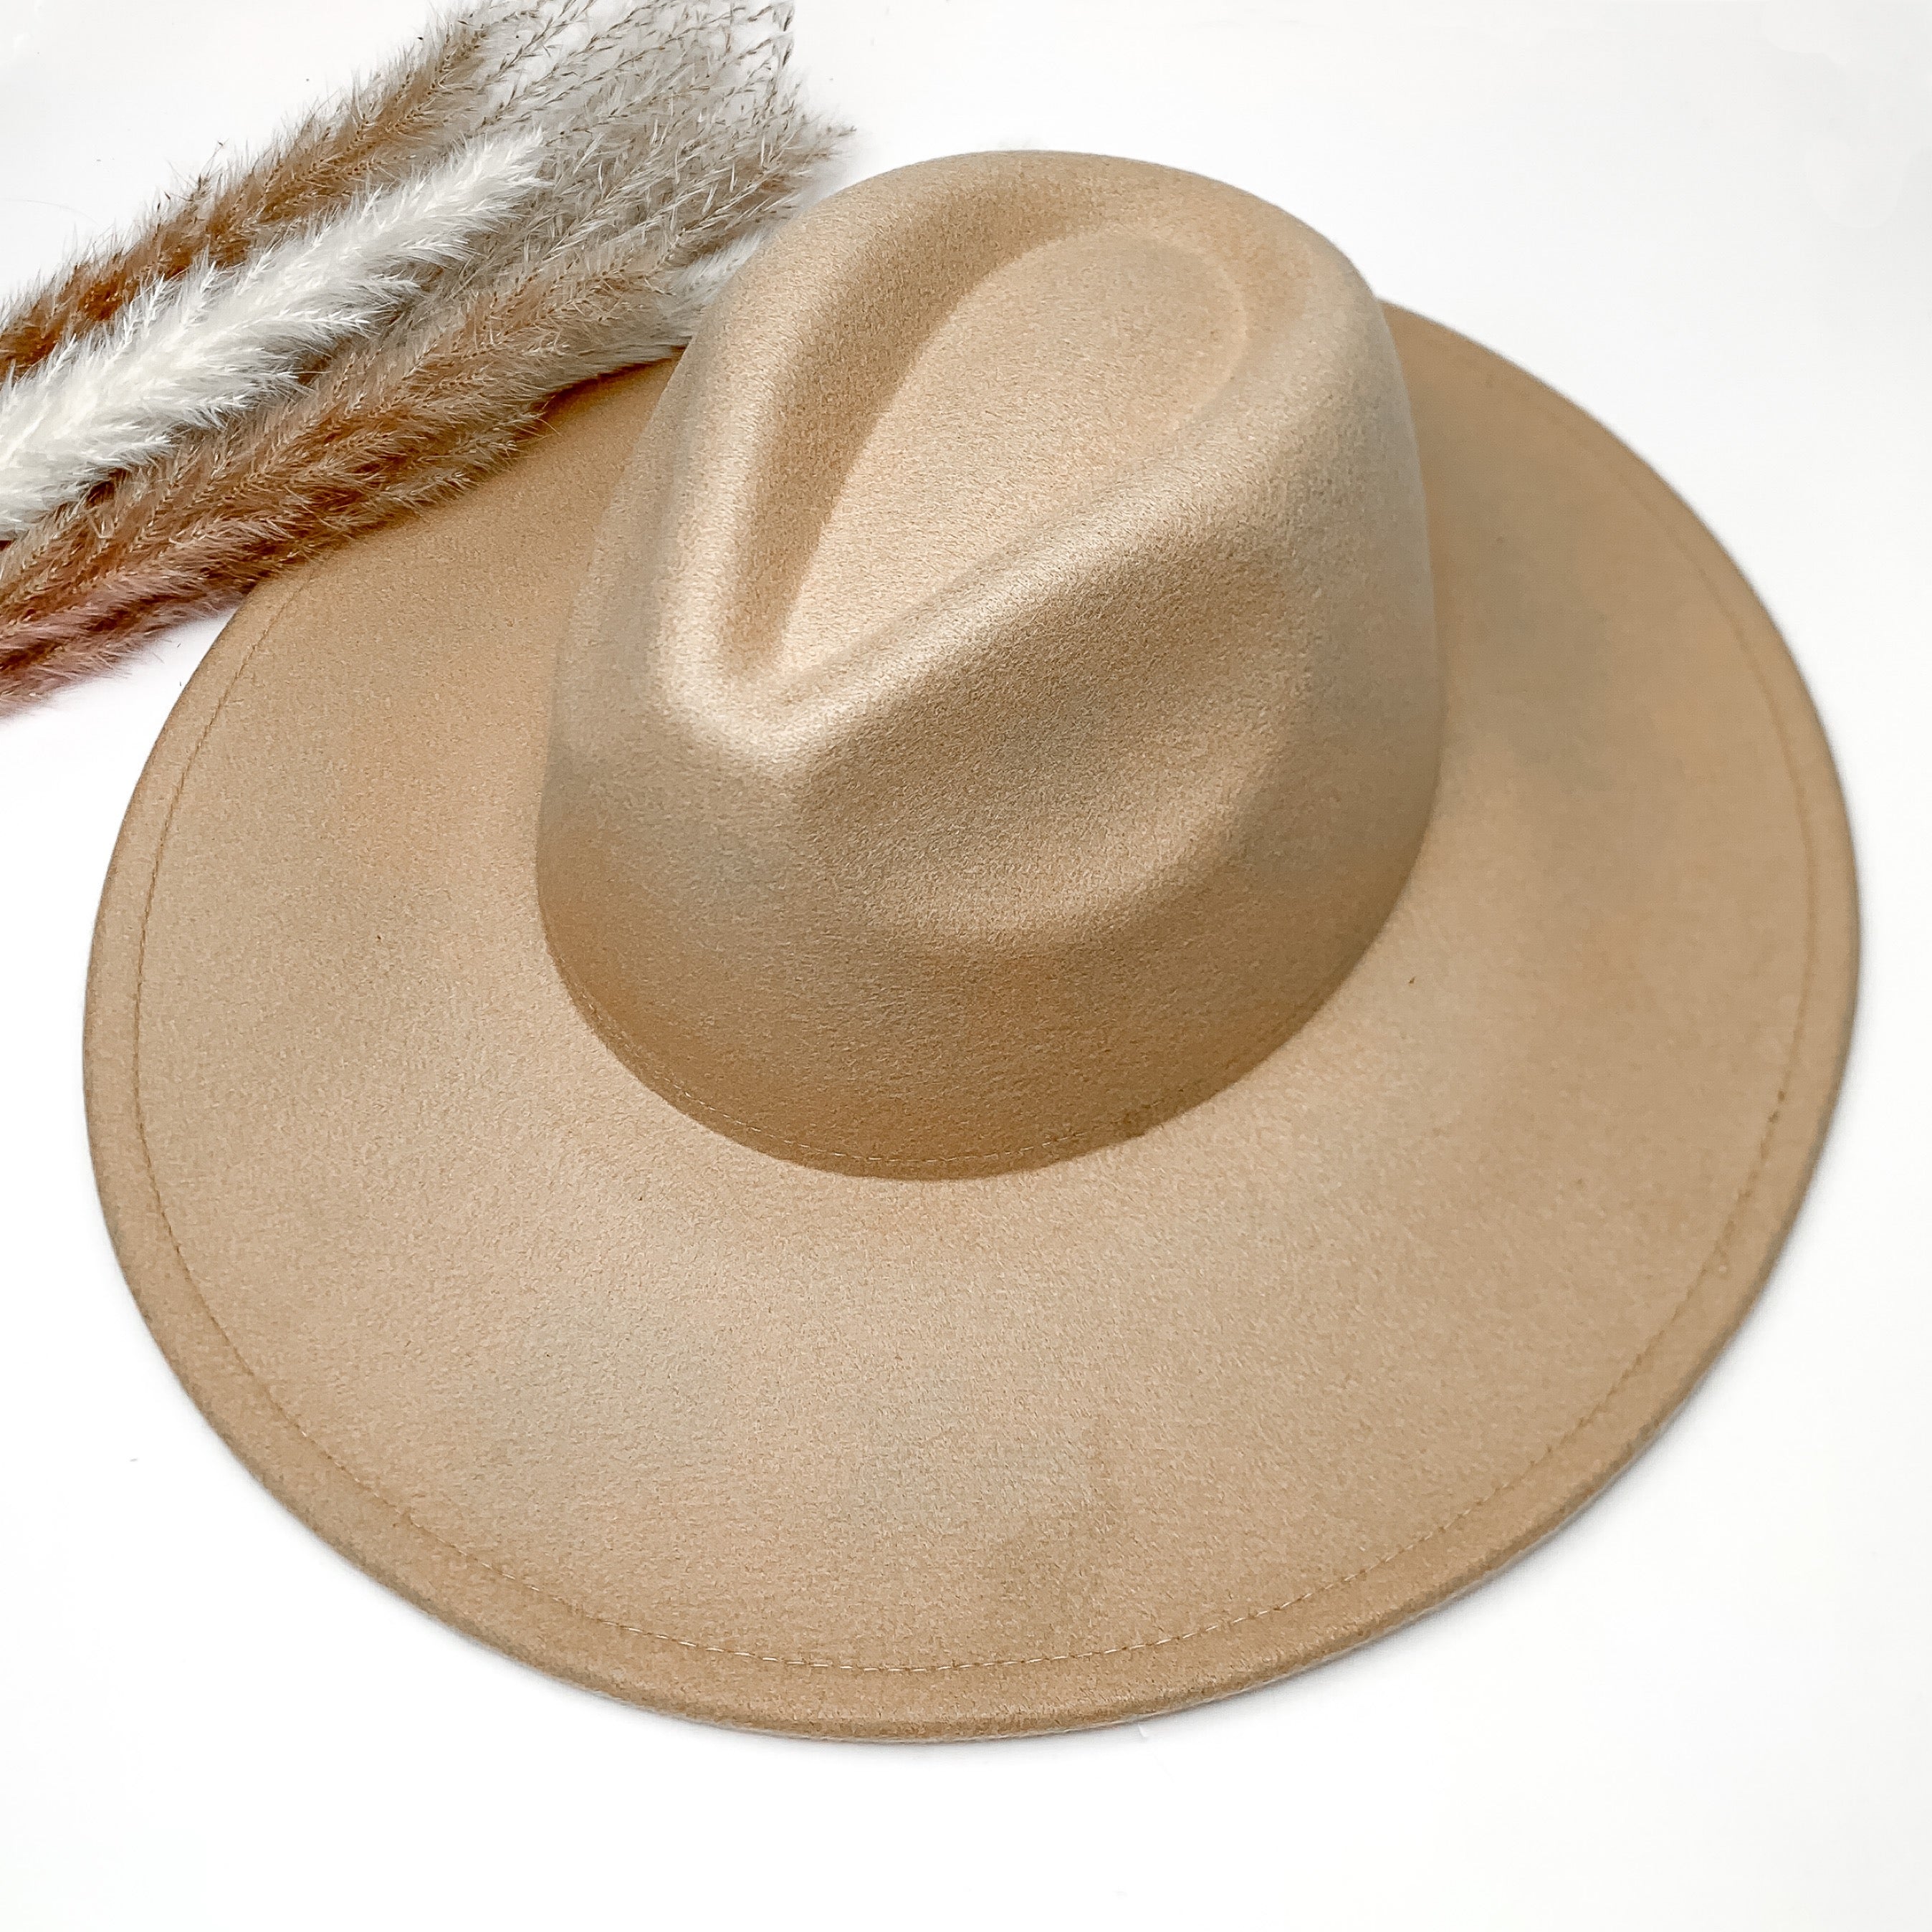 Plain and simple faux felt hat in taupe brown color. This hat is sitting on a white background. There is brown and white feathers to the left of the hat.